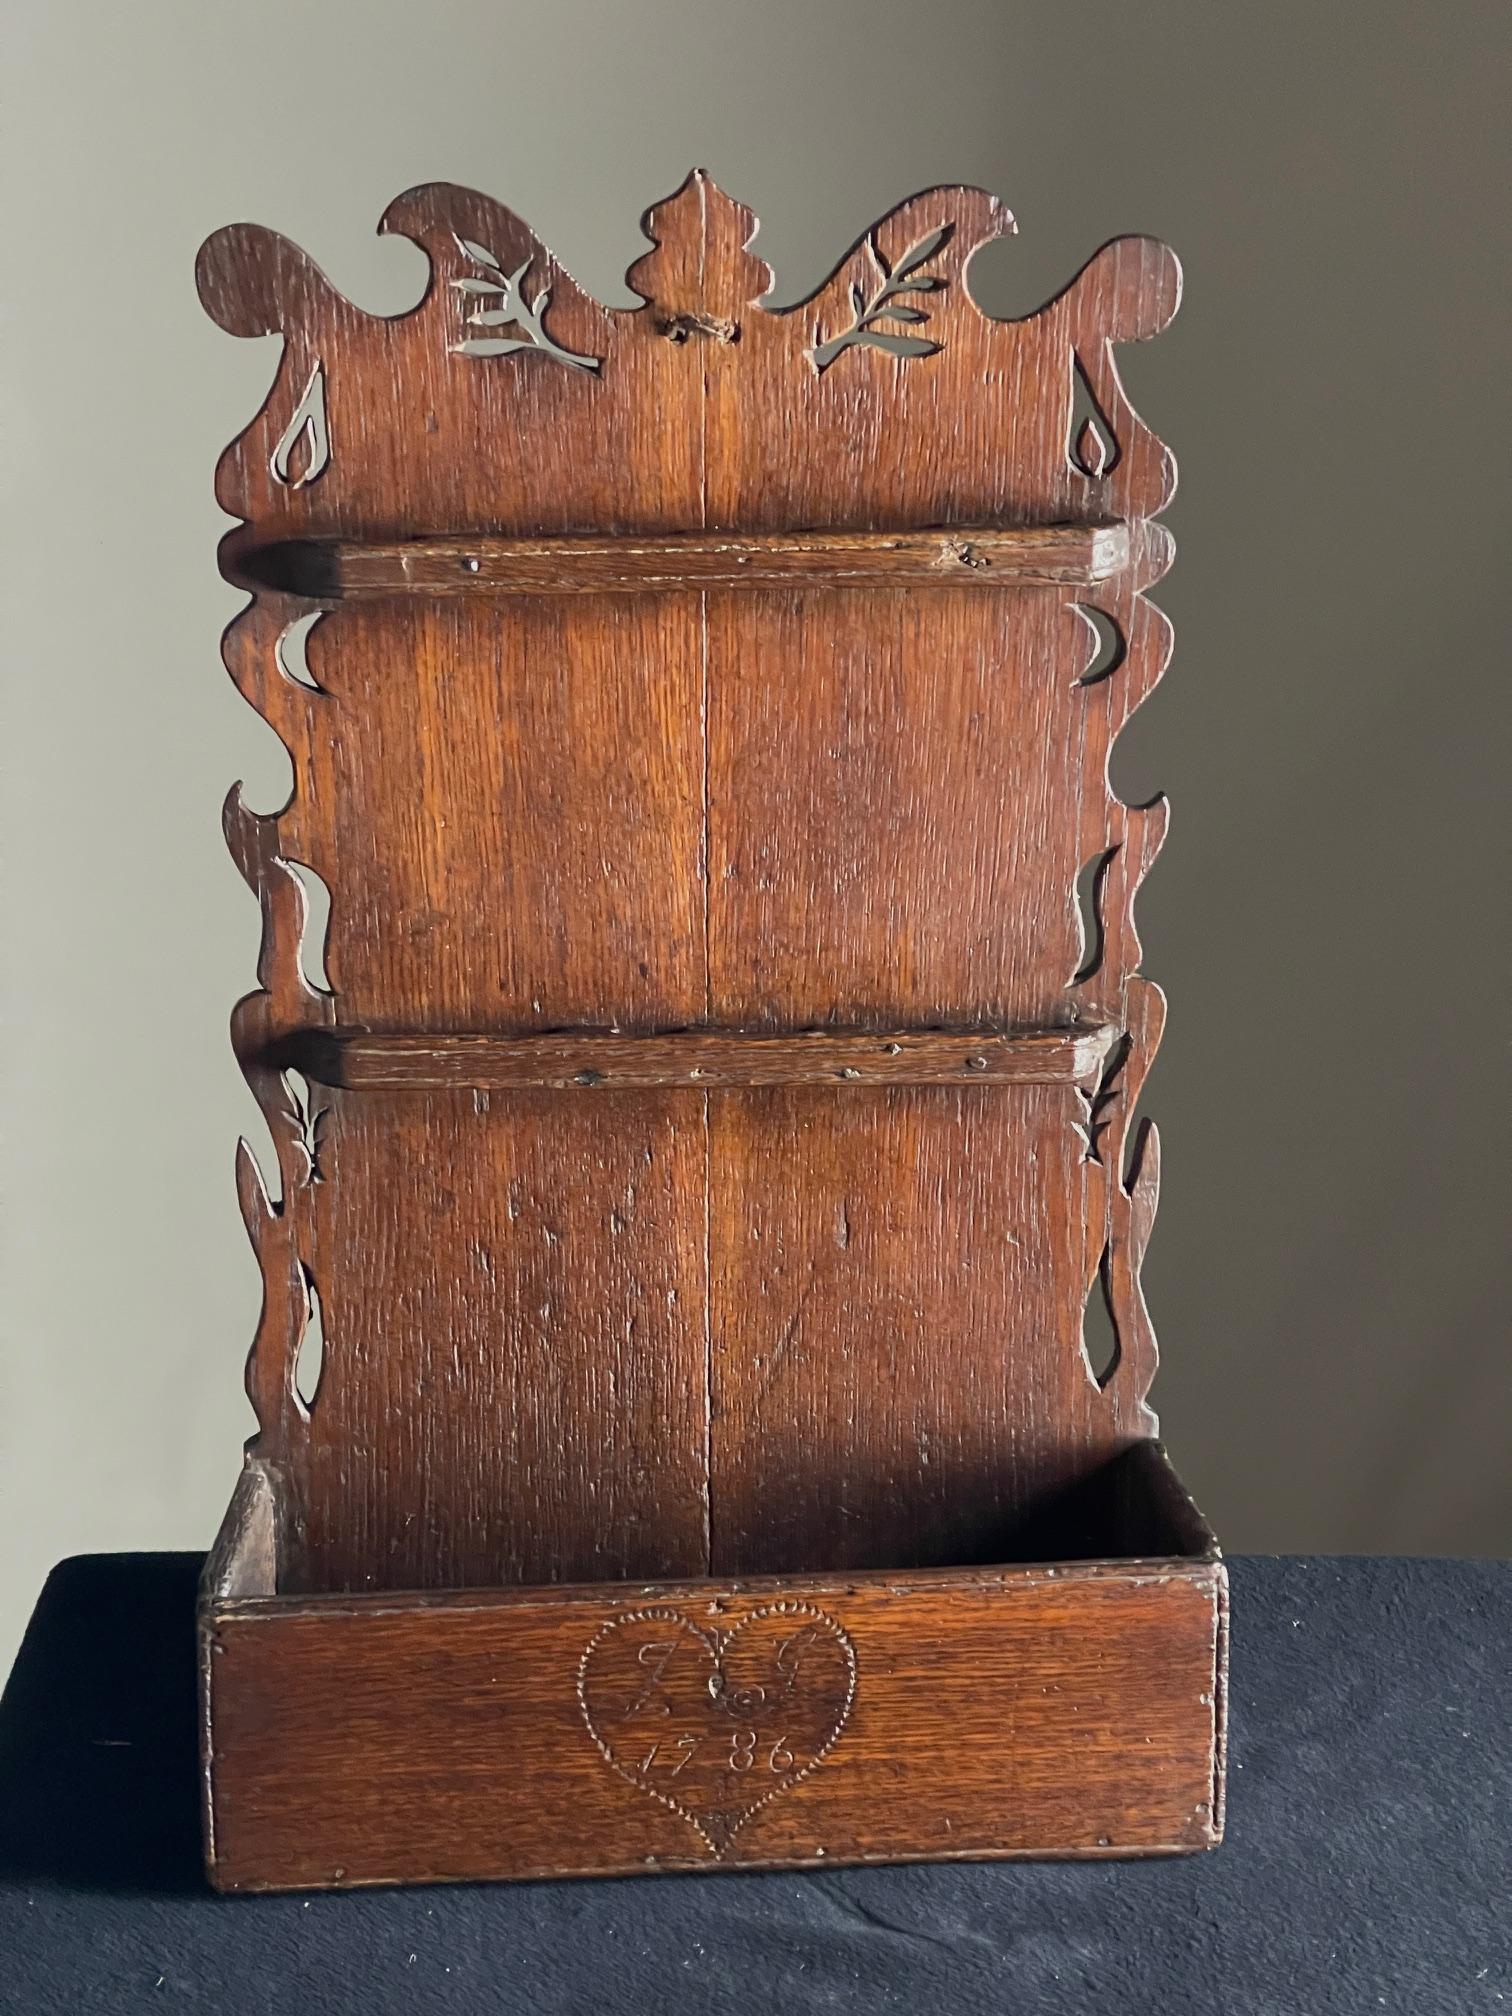 Oak 18th Century spoon rack

Dated 1786 oak spoon rack with shaped sides and interesting piercings.

Dimensions 64 cms high 38cms wide 14cms deep